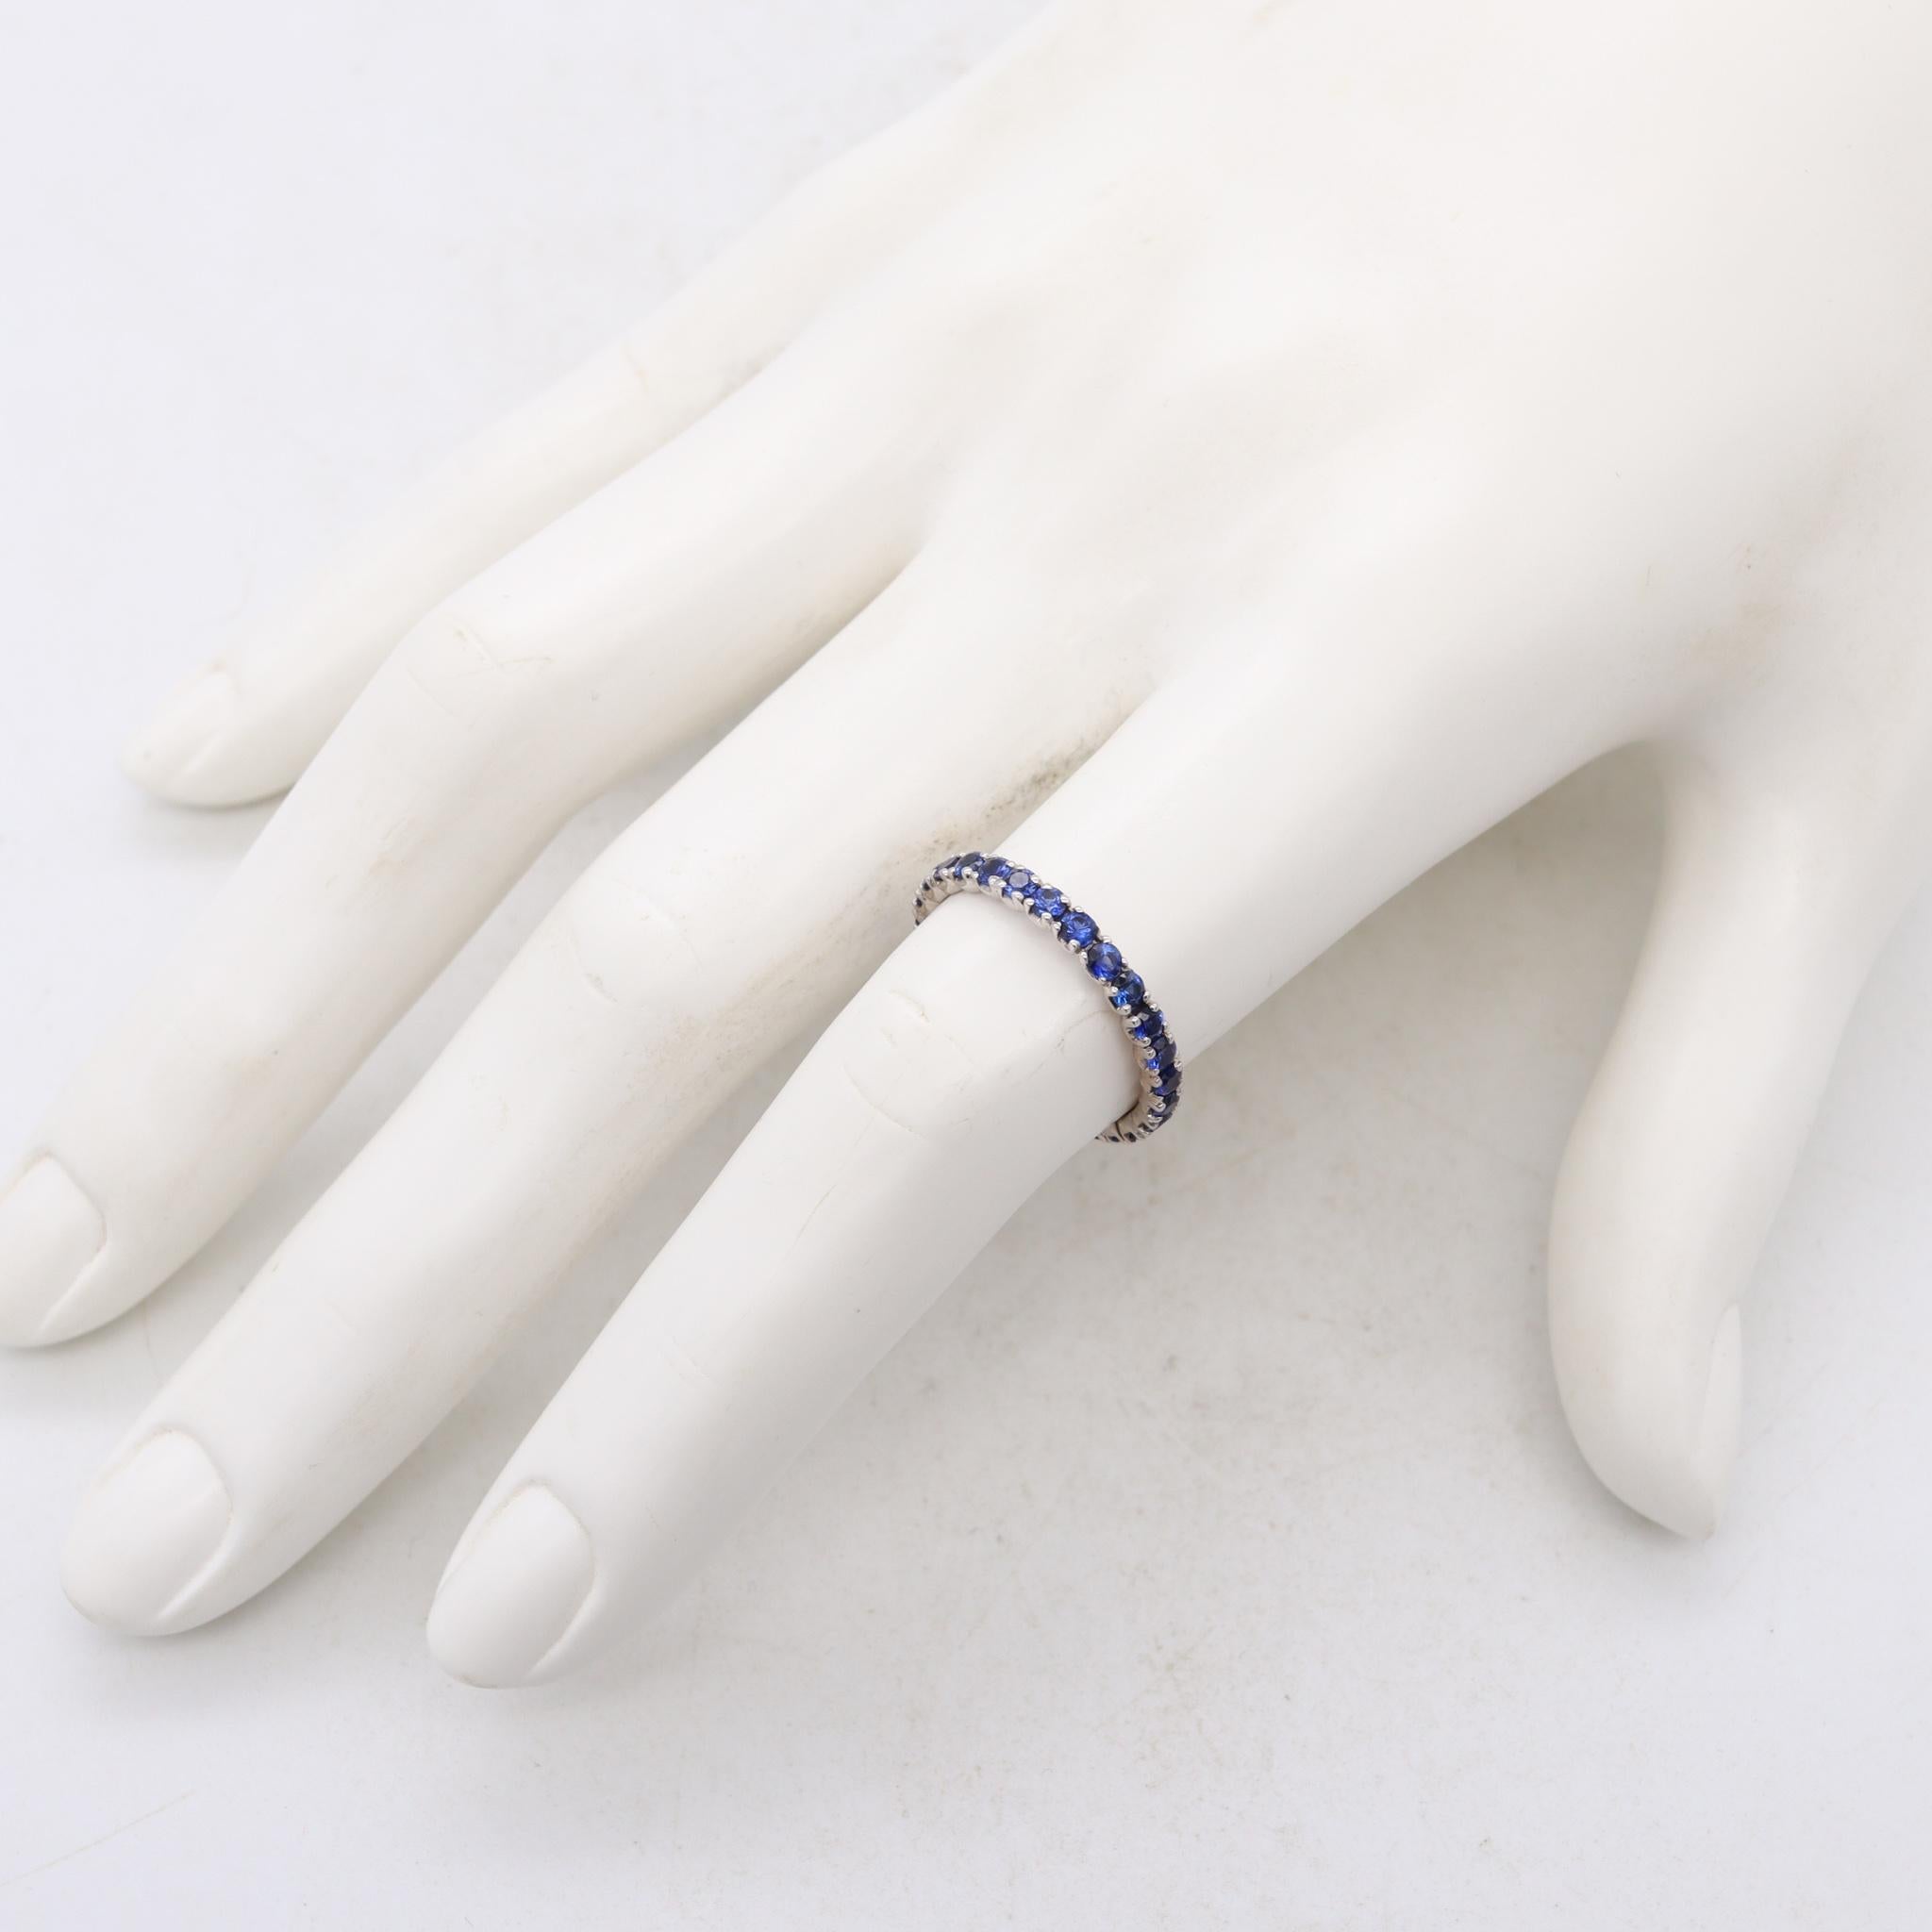 Brilliant Cut Eternity Ring Band in 18kt White Gold with 1.35 Cts in Ceylon Blue Sapphires For Sale